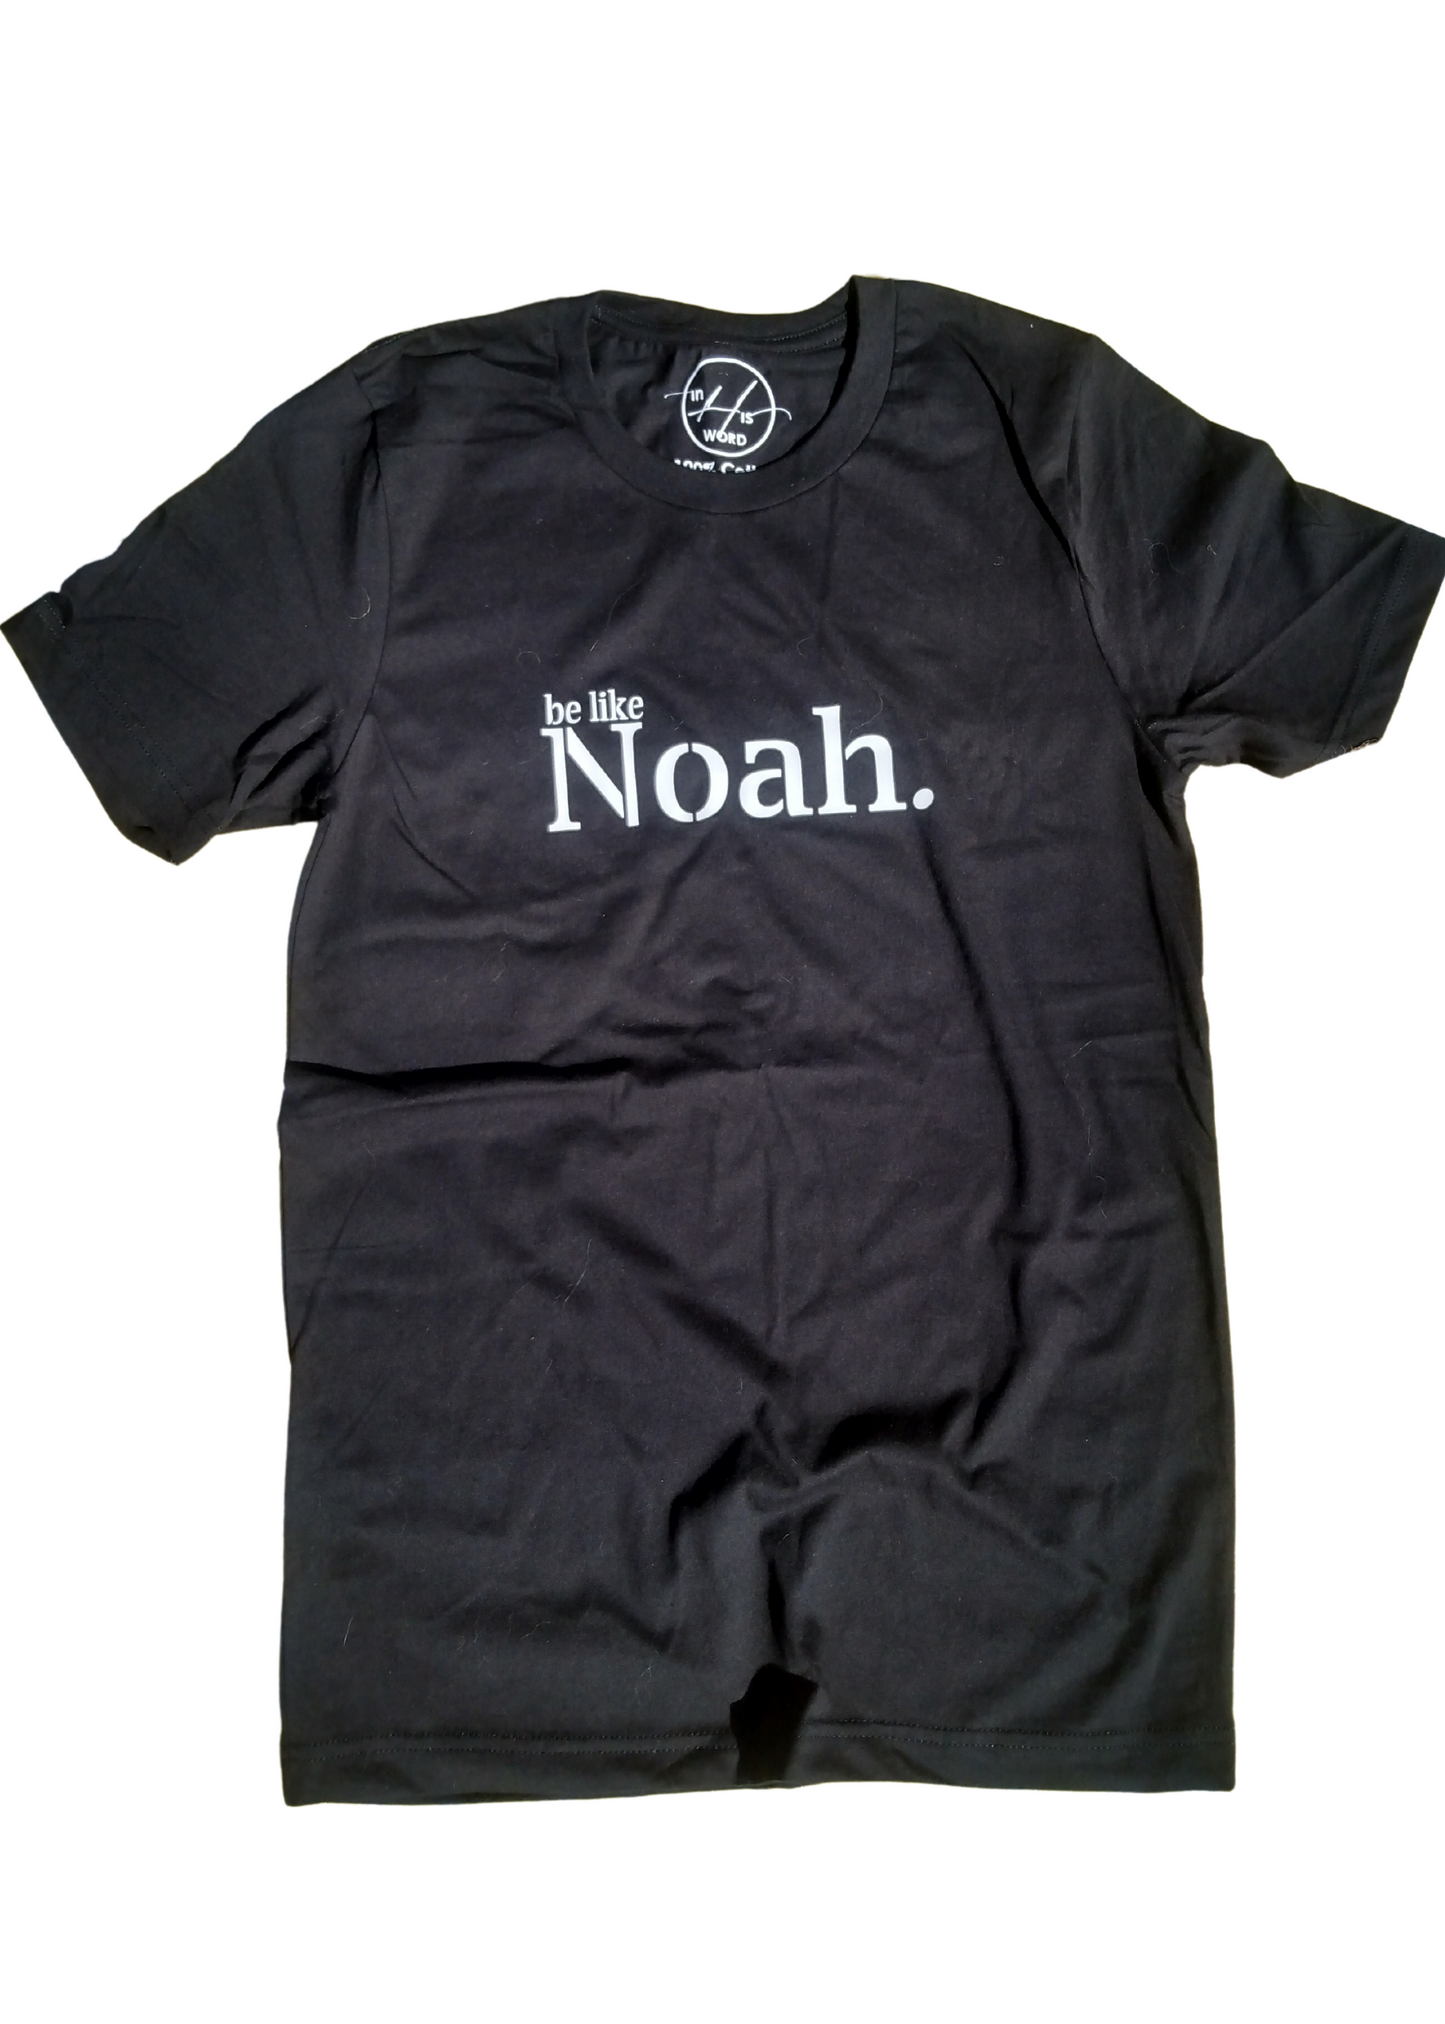 Black t-shirt is unisex sizing - fits men and women. 100% cotton